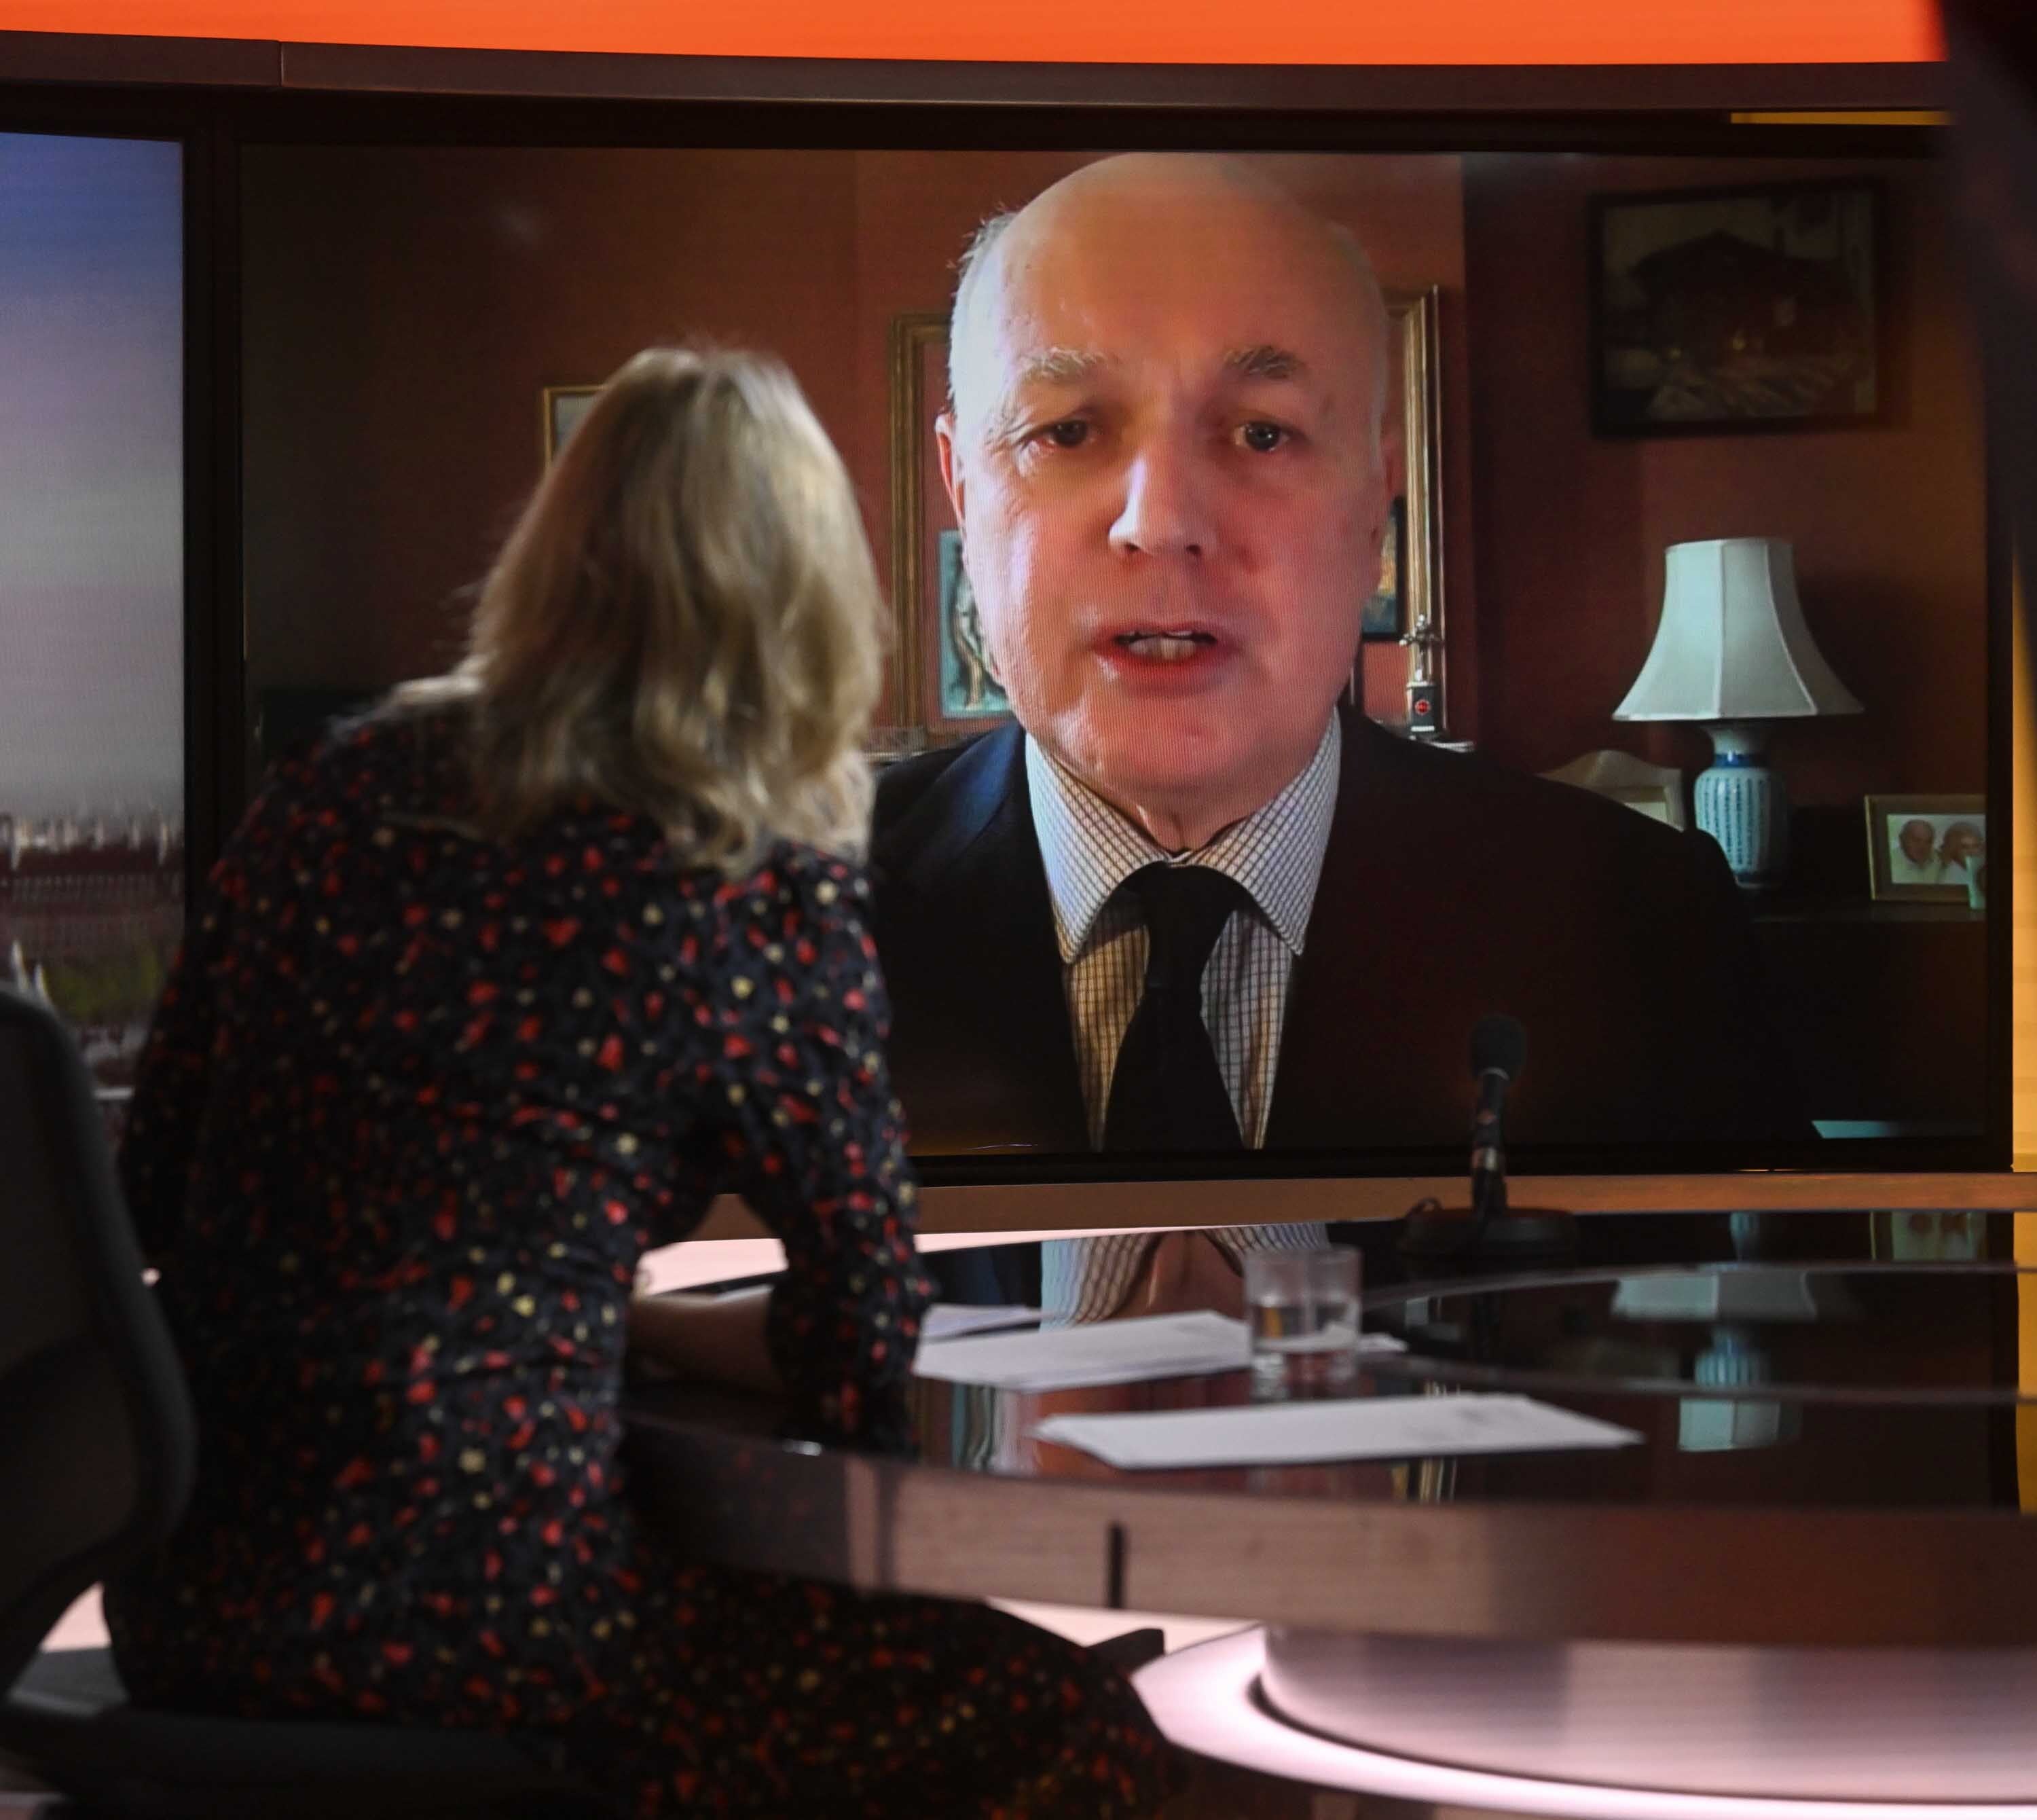 Former Tory leader Sir Iain Duncan Smith being interviewed by host Sophie Raworth (Jeff Overs/BBC)